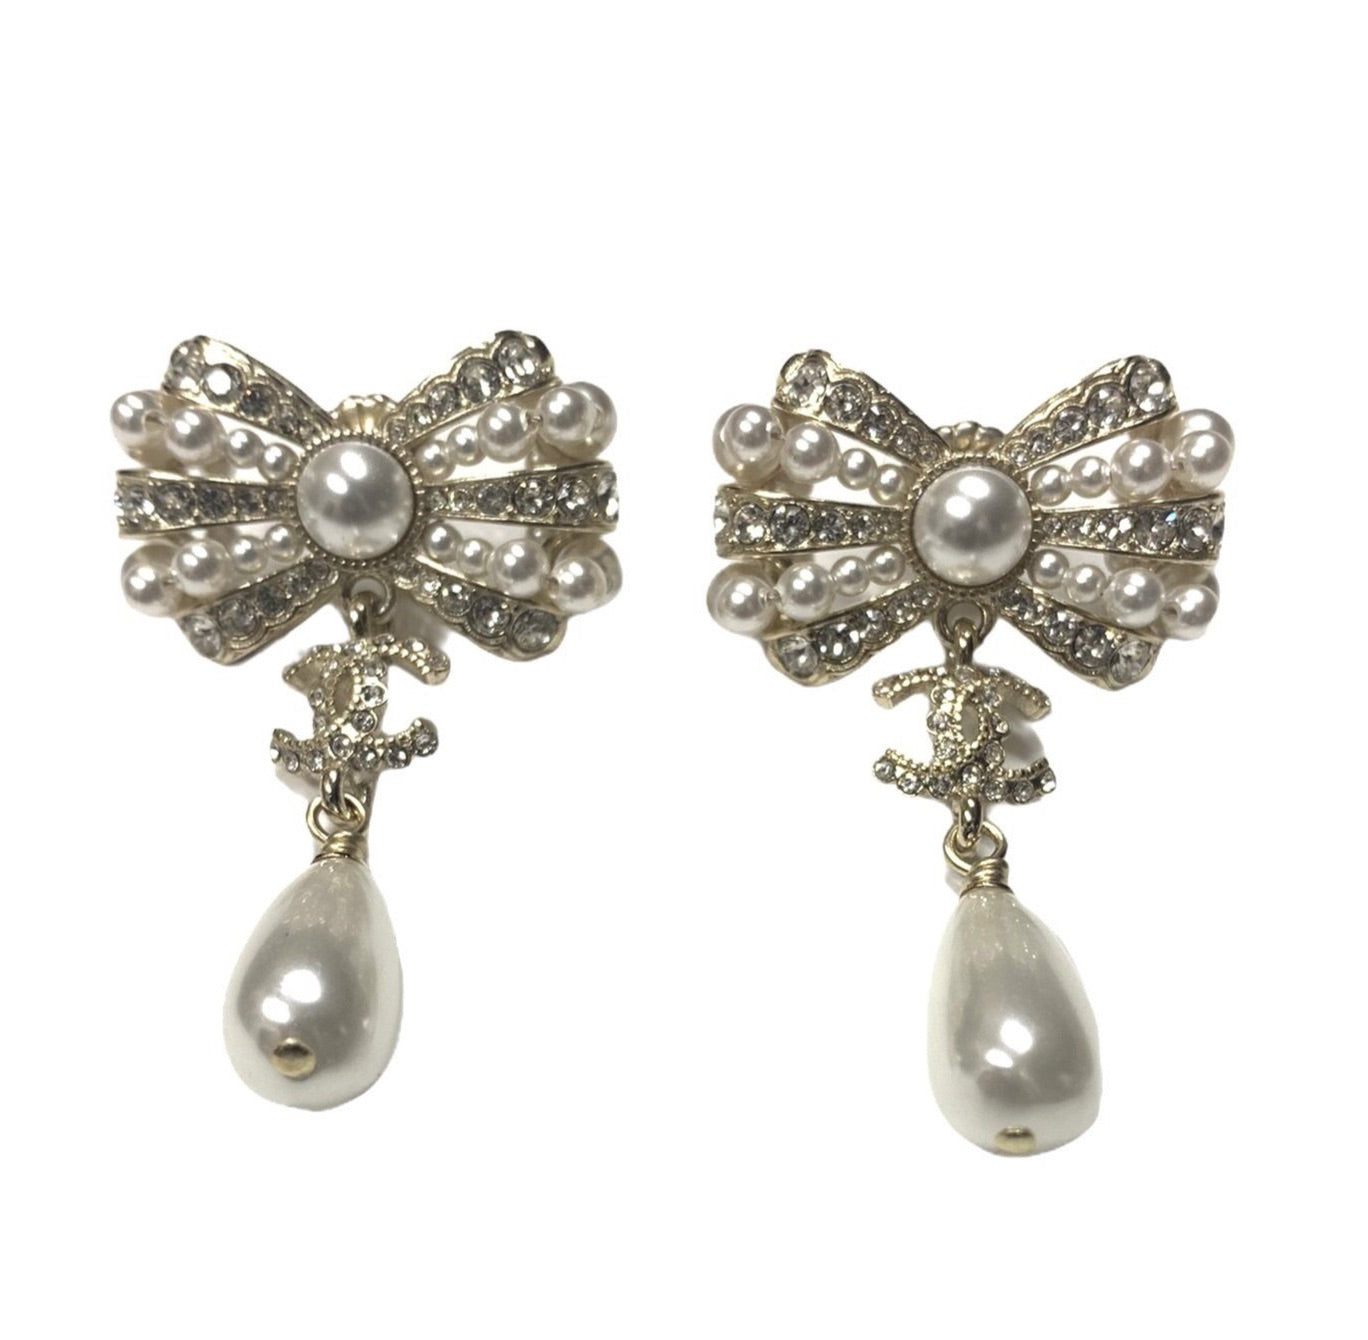 vanter Overdreven krigerisk CHANEL BOW METAL GLASS PEARLS CC SPRING SUMMER 2020 EARRINGS – Chic Selects  of Palm Beach